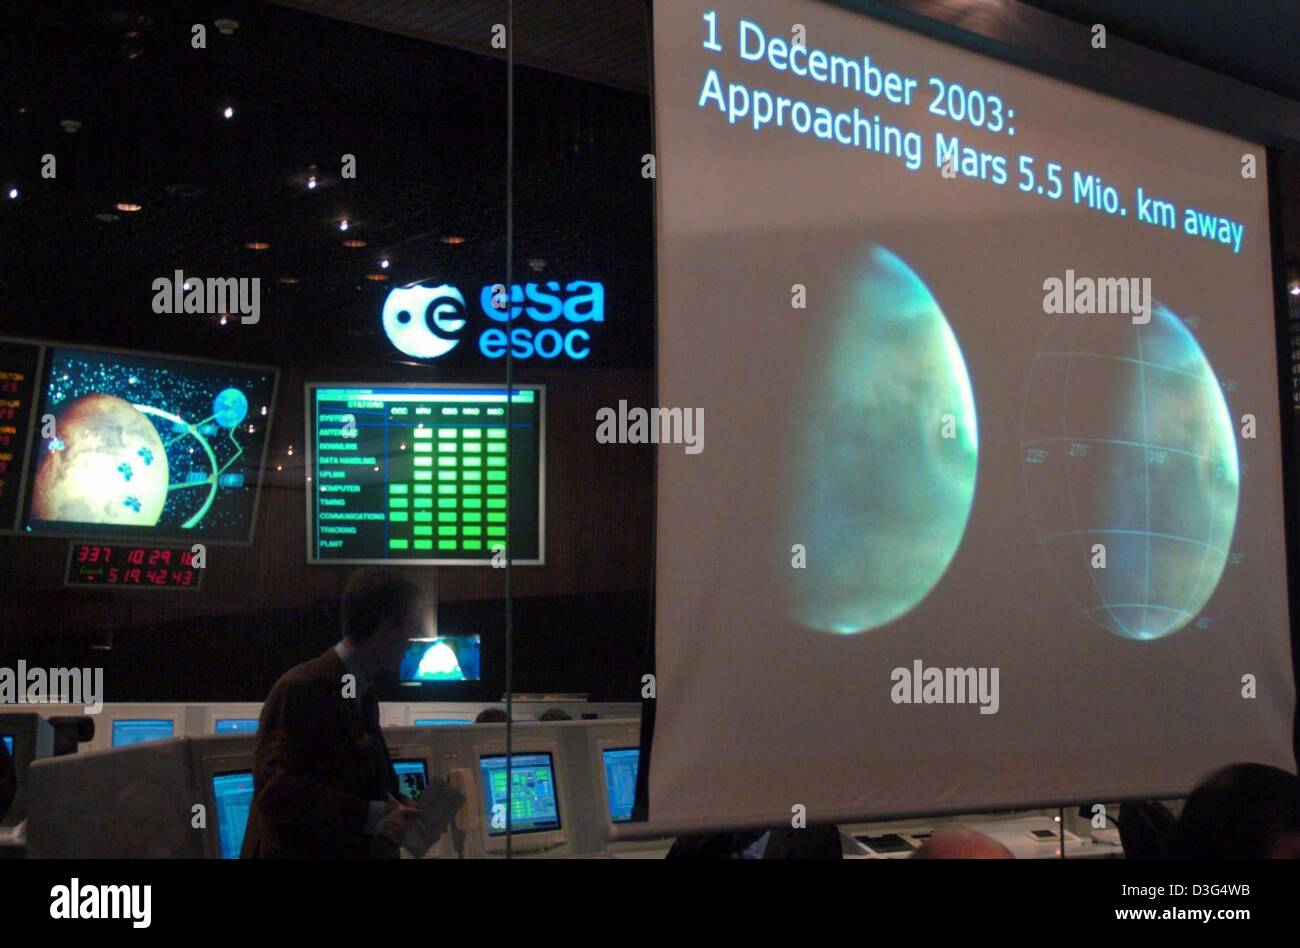 (dpa) - The first photo of Mars which was transmitted by the European planetary space probe 'Mars Express' during its flight to the red planet is projected to a screen (R) at the master control centre of the European Space Agency (ESA) in Darmstadt, Germany, 3 December 2003. The probe was launched from the Russian spaceport in Baikonur and is now on its way to Mars. The landing uni Stock Photo